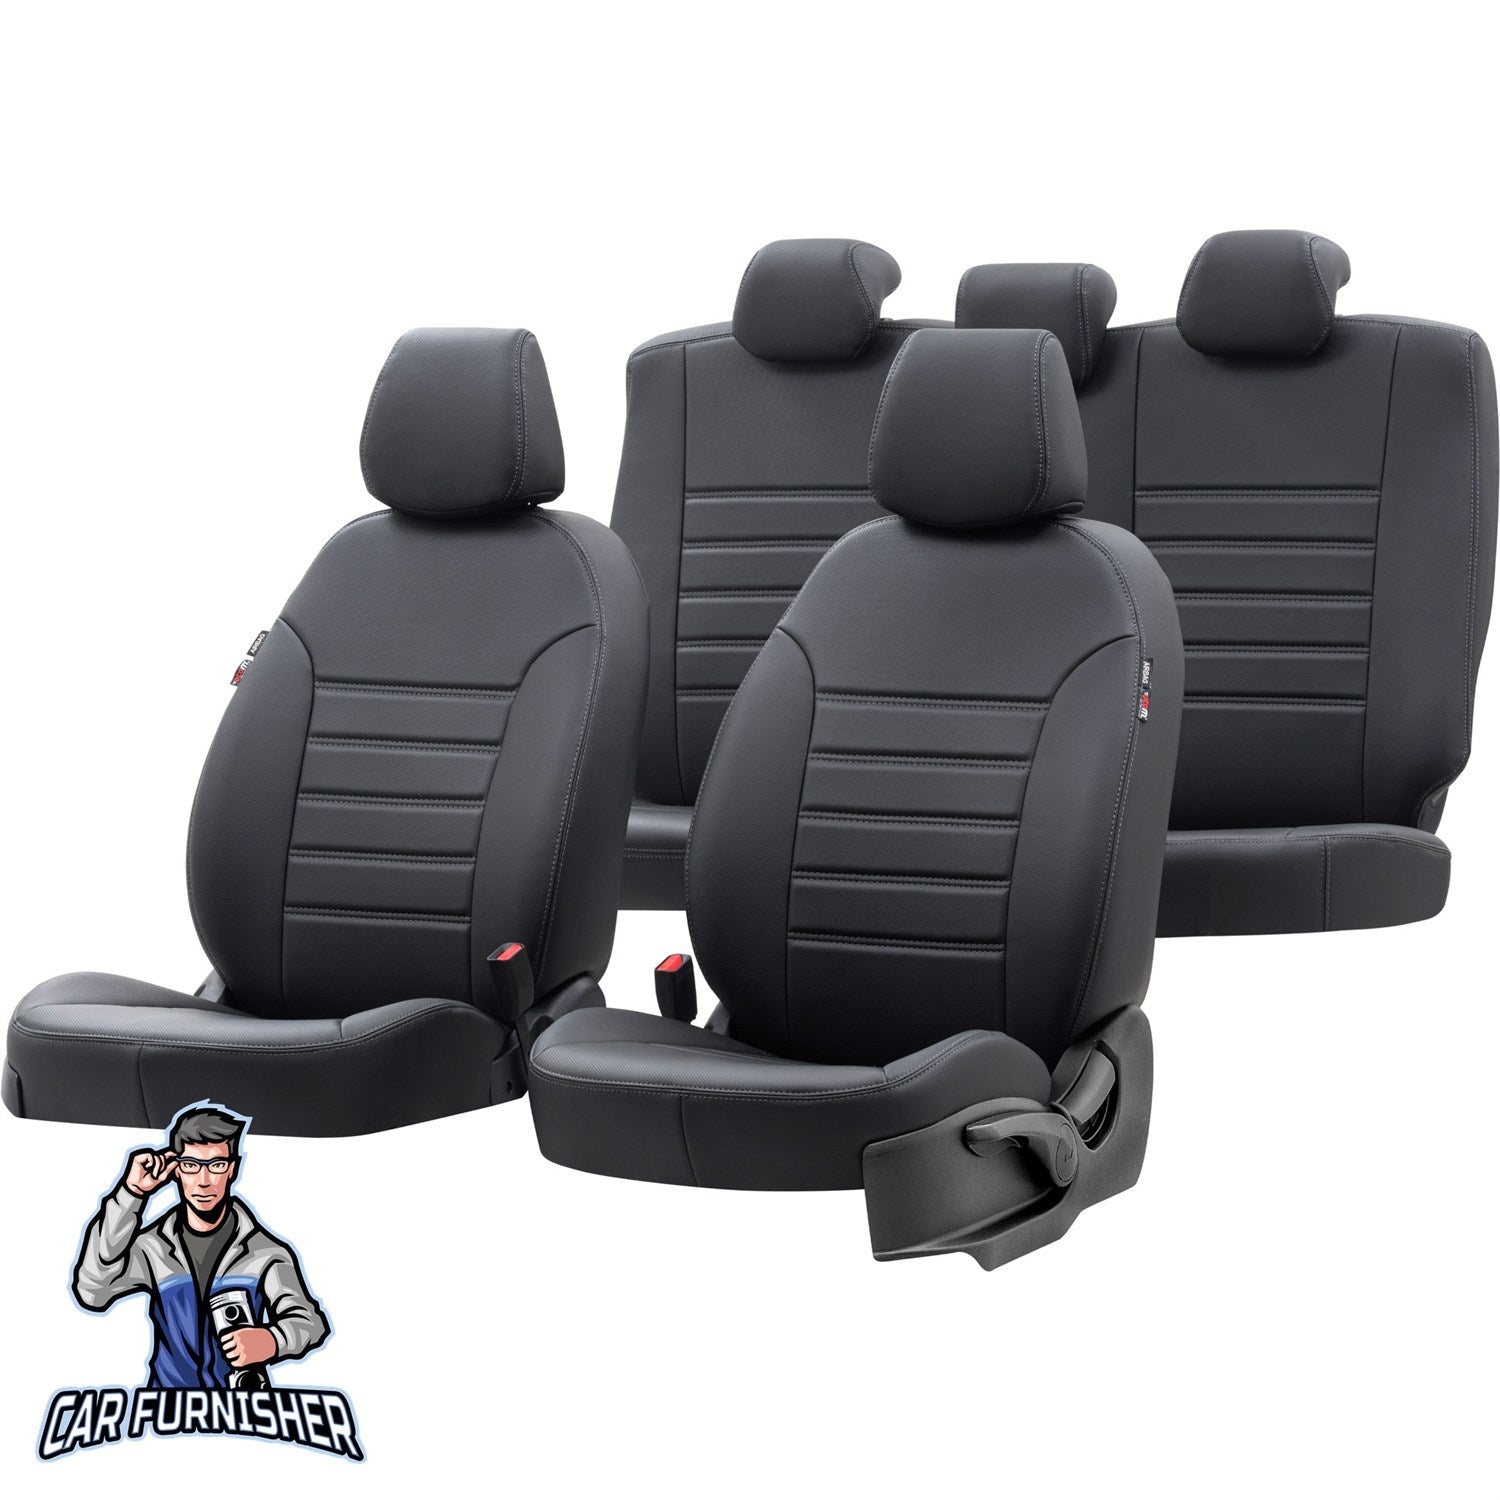 Volvo S80 Seat Cover Istanbul Leather Design Black Leather